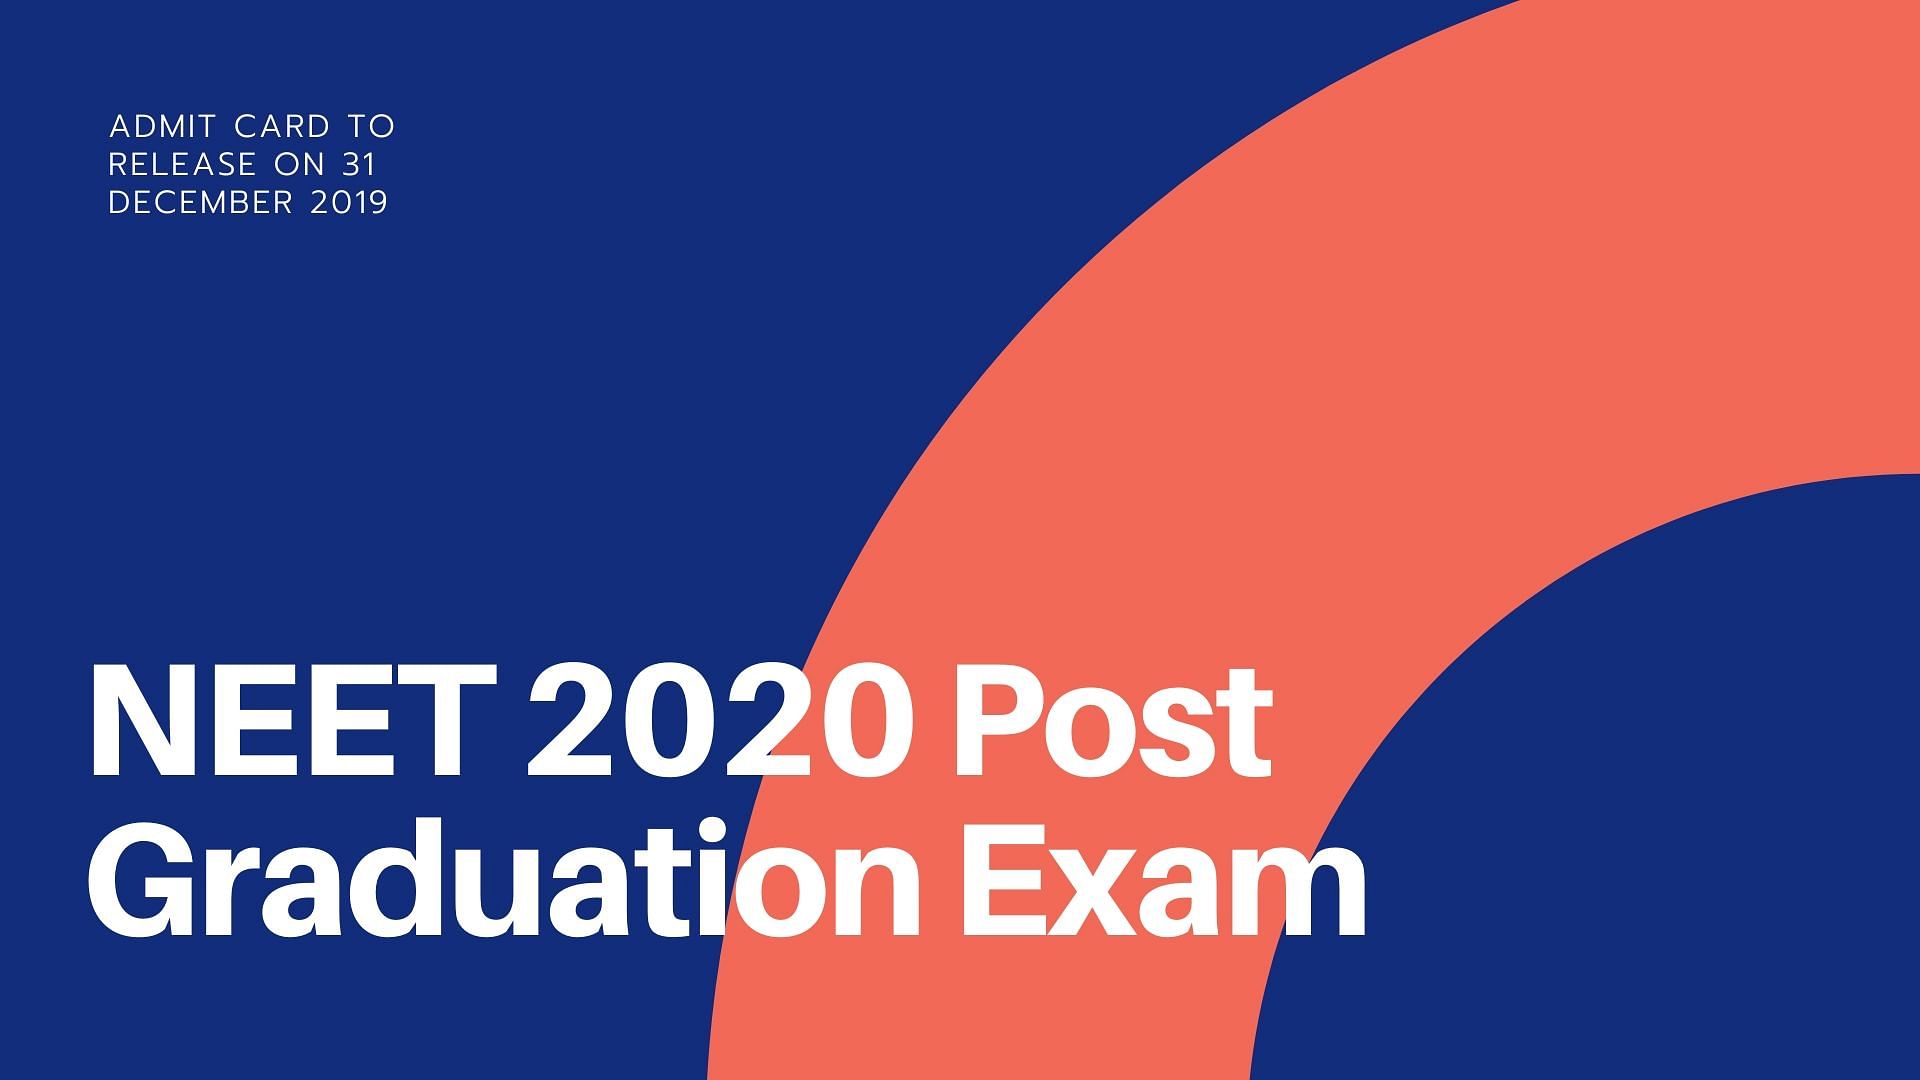 NEET PG 2020 Admit Card, Exam Pattern and Important Instructions